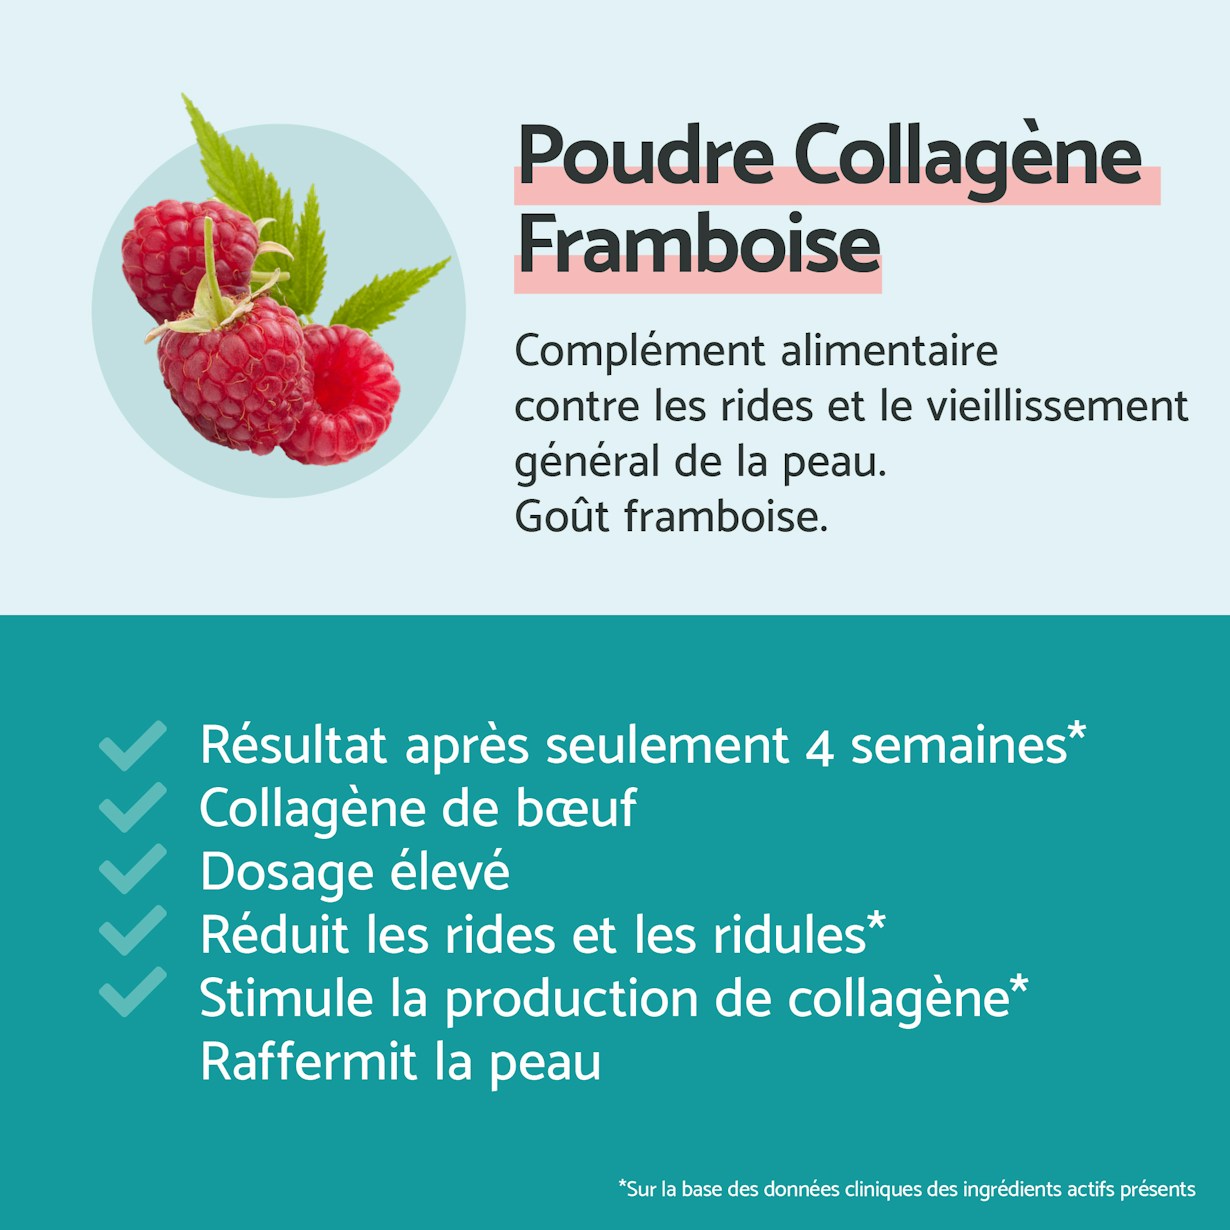 Remescar pdp pictures website and amazon 2000x2000px collagen powder raspberry FRA2